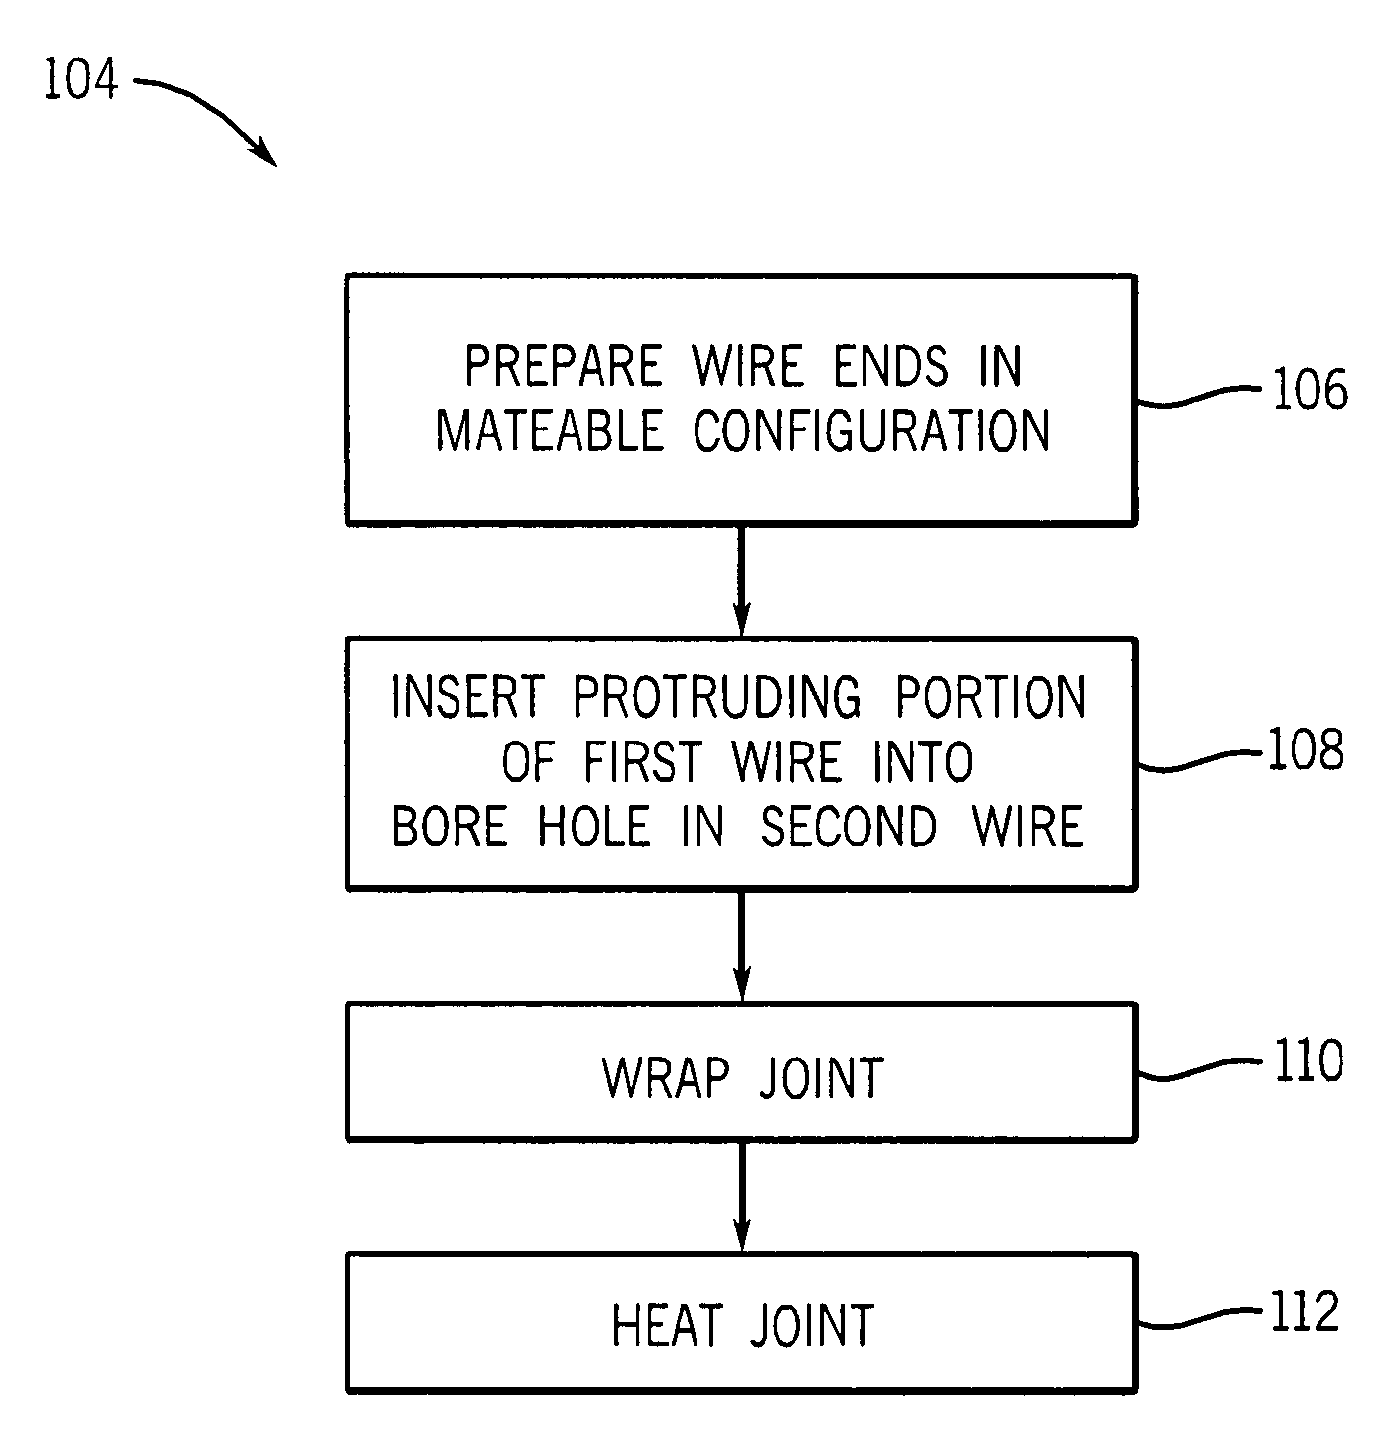 Low resistivity joints for joining wires and methods for making the same